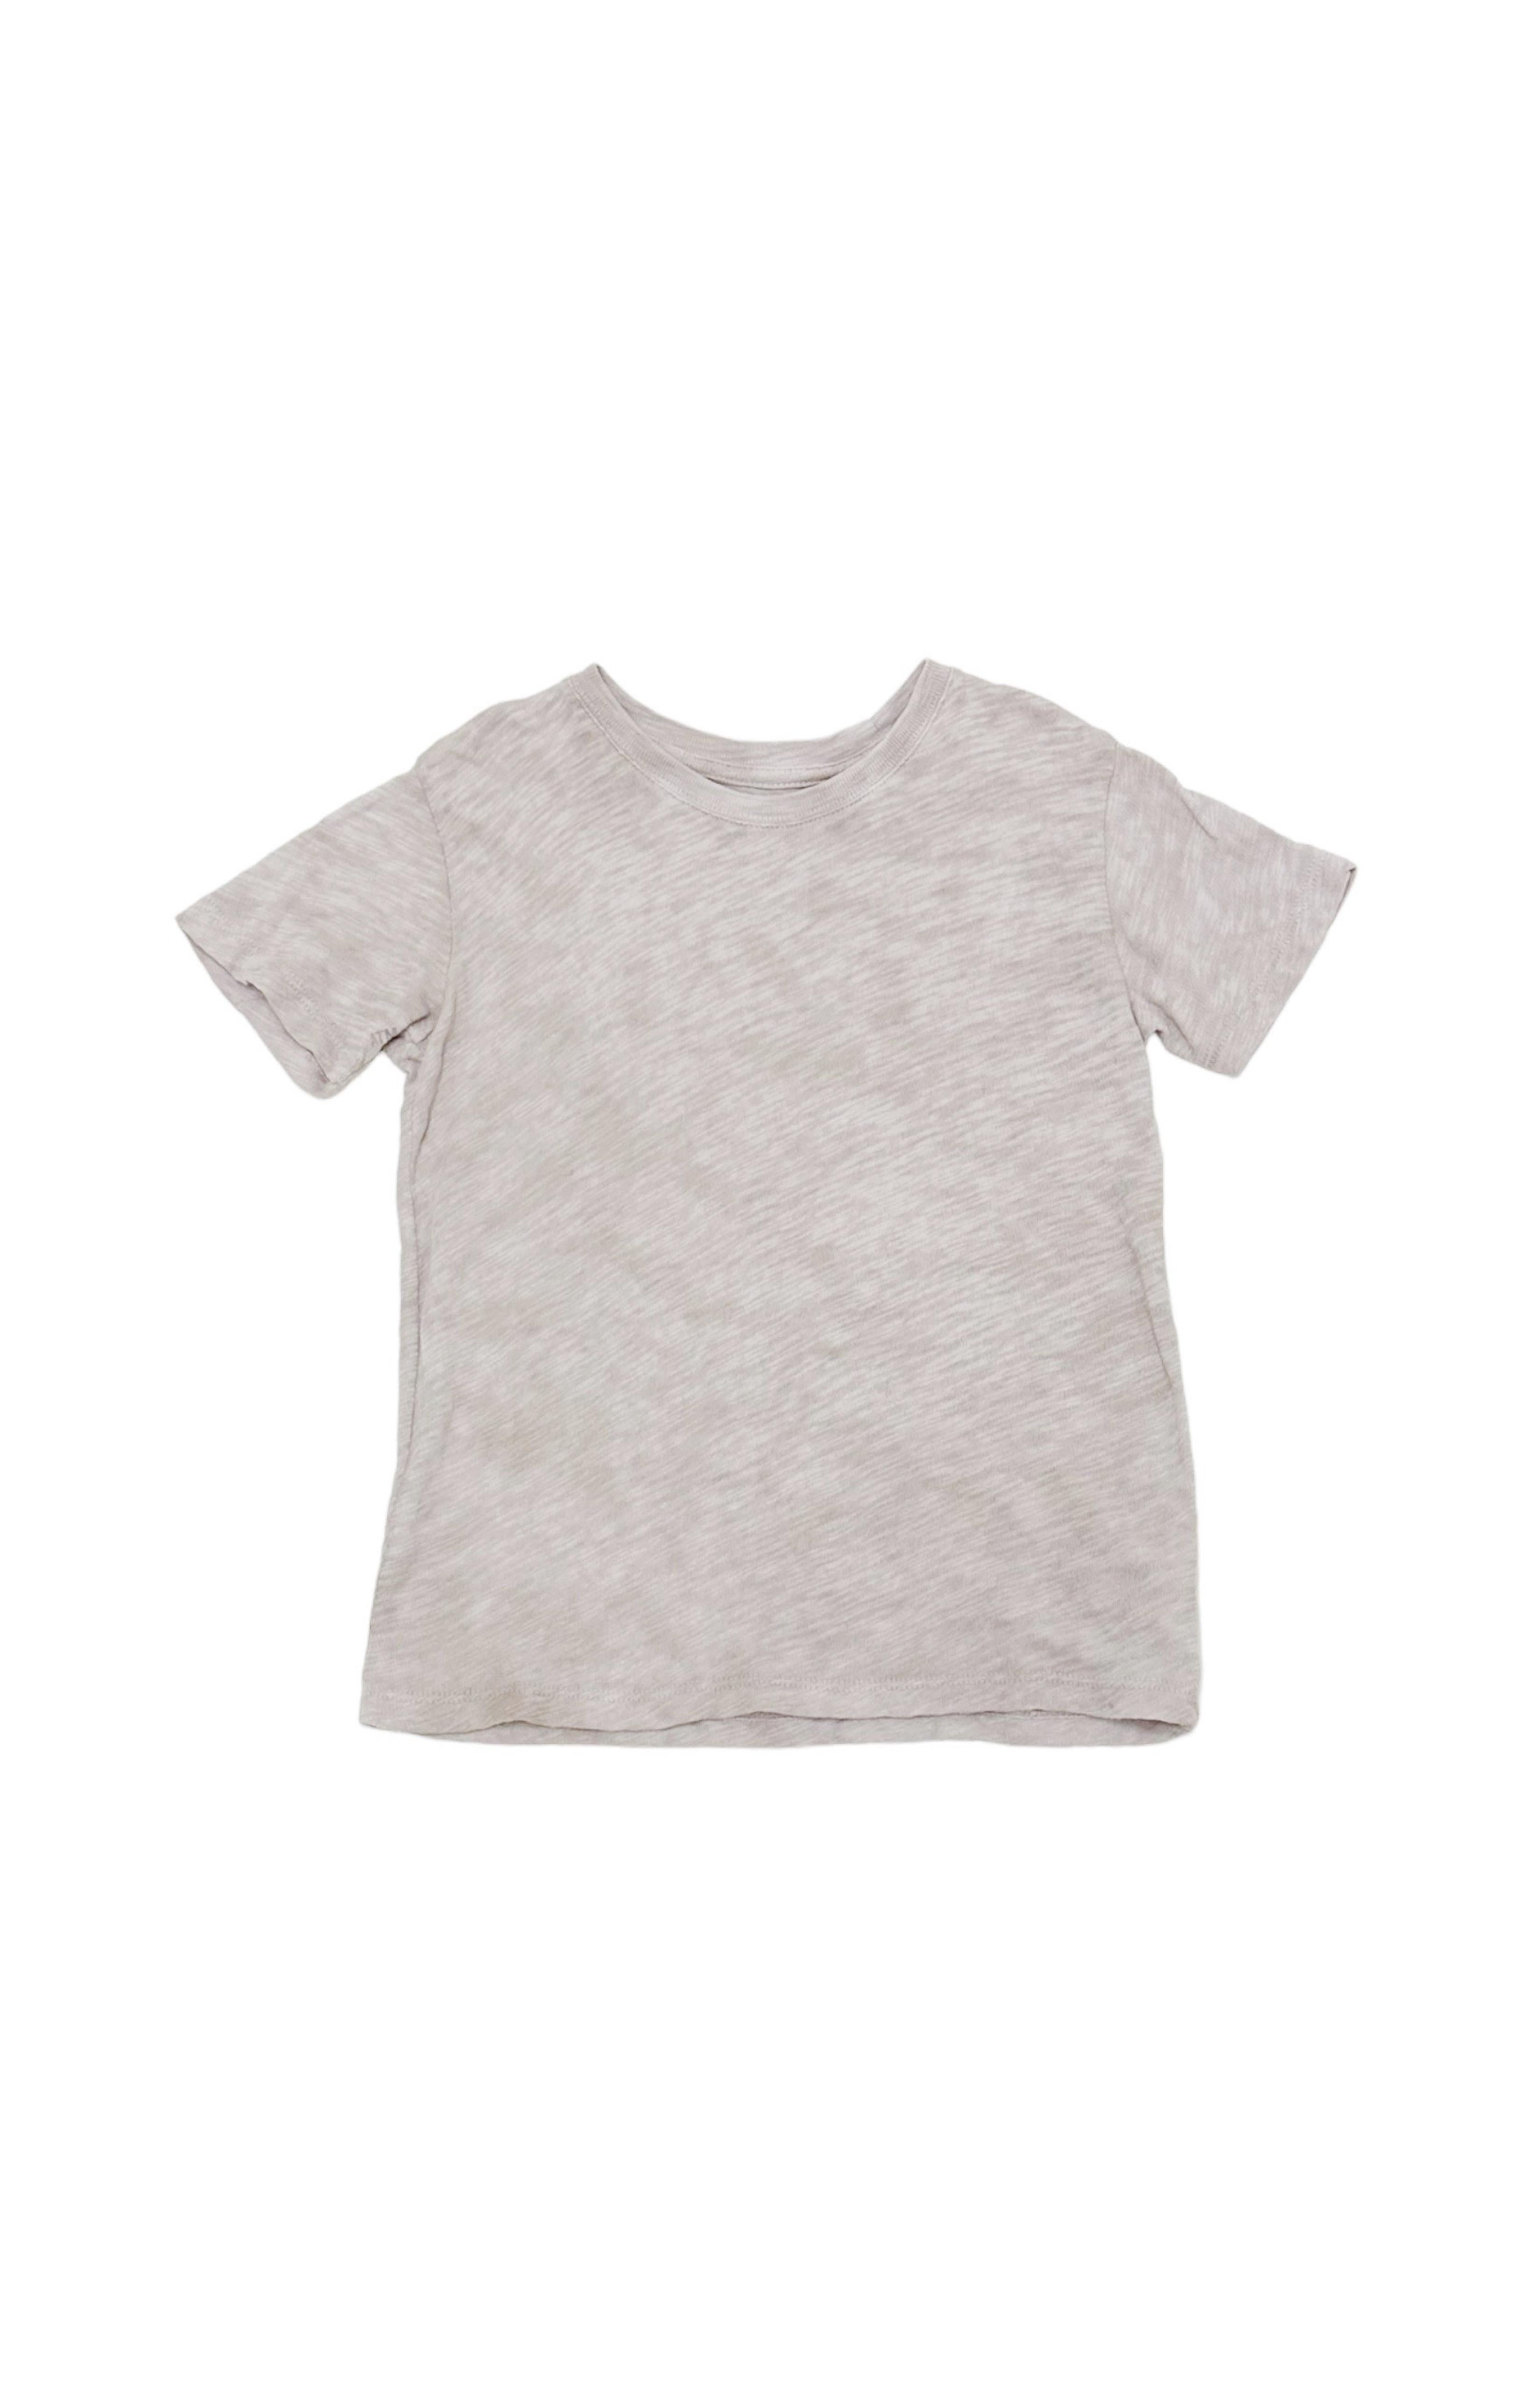 ATM KIDS Top Size: 3 Years